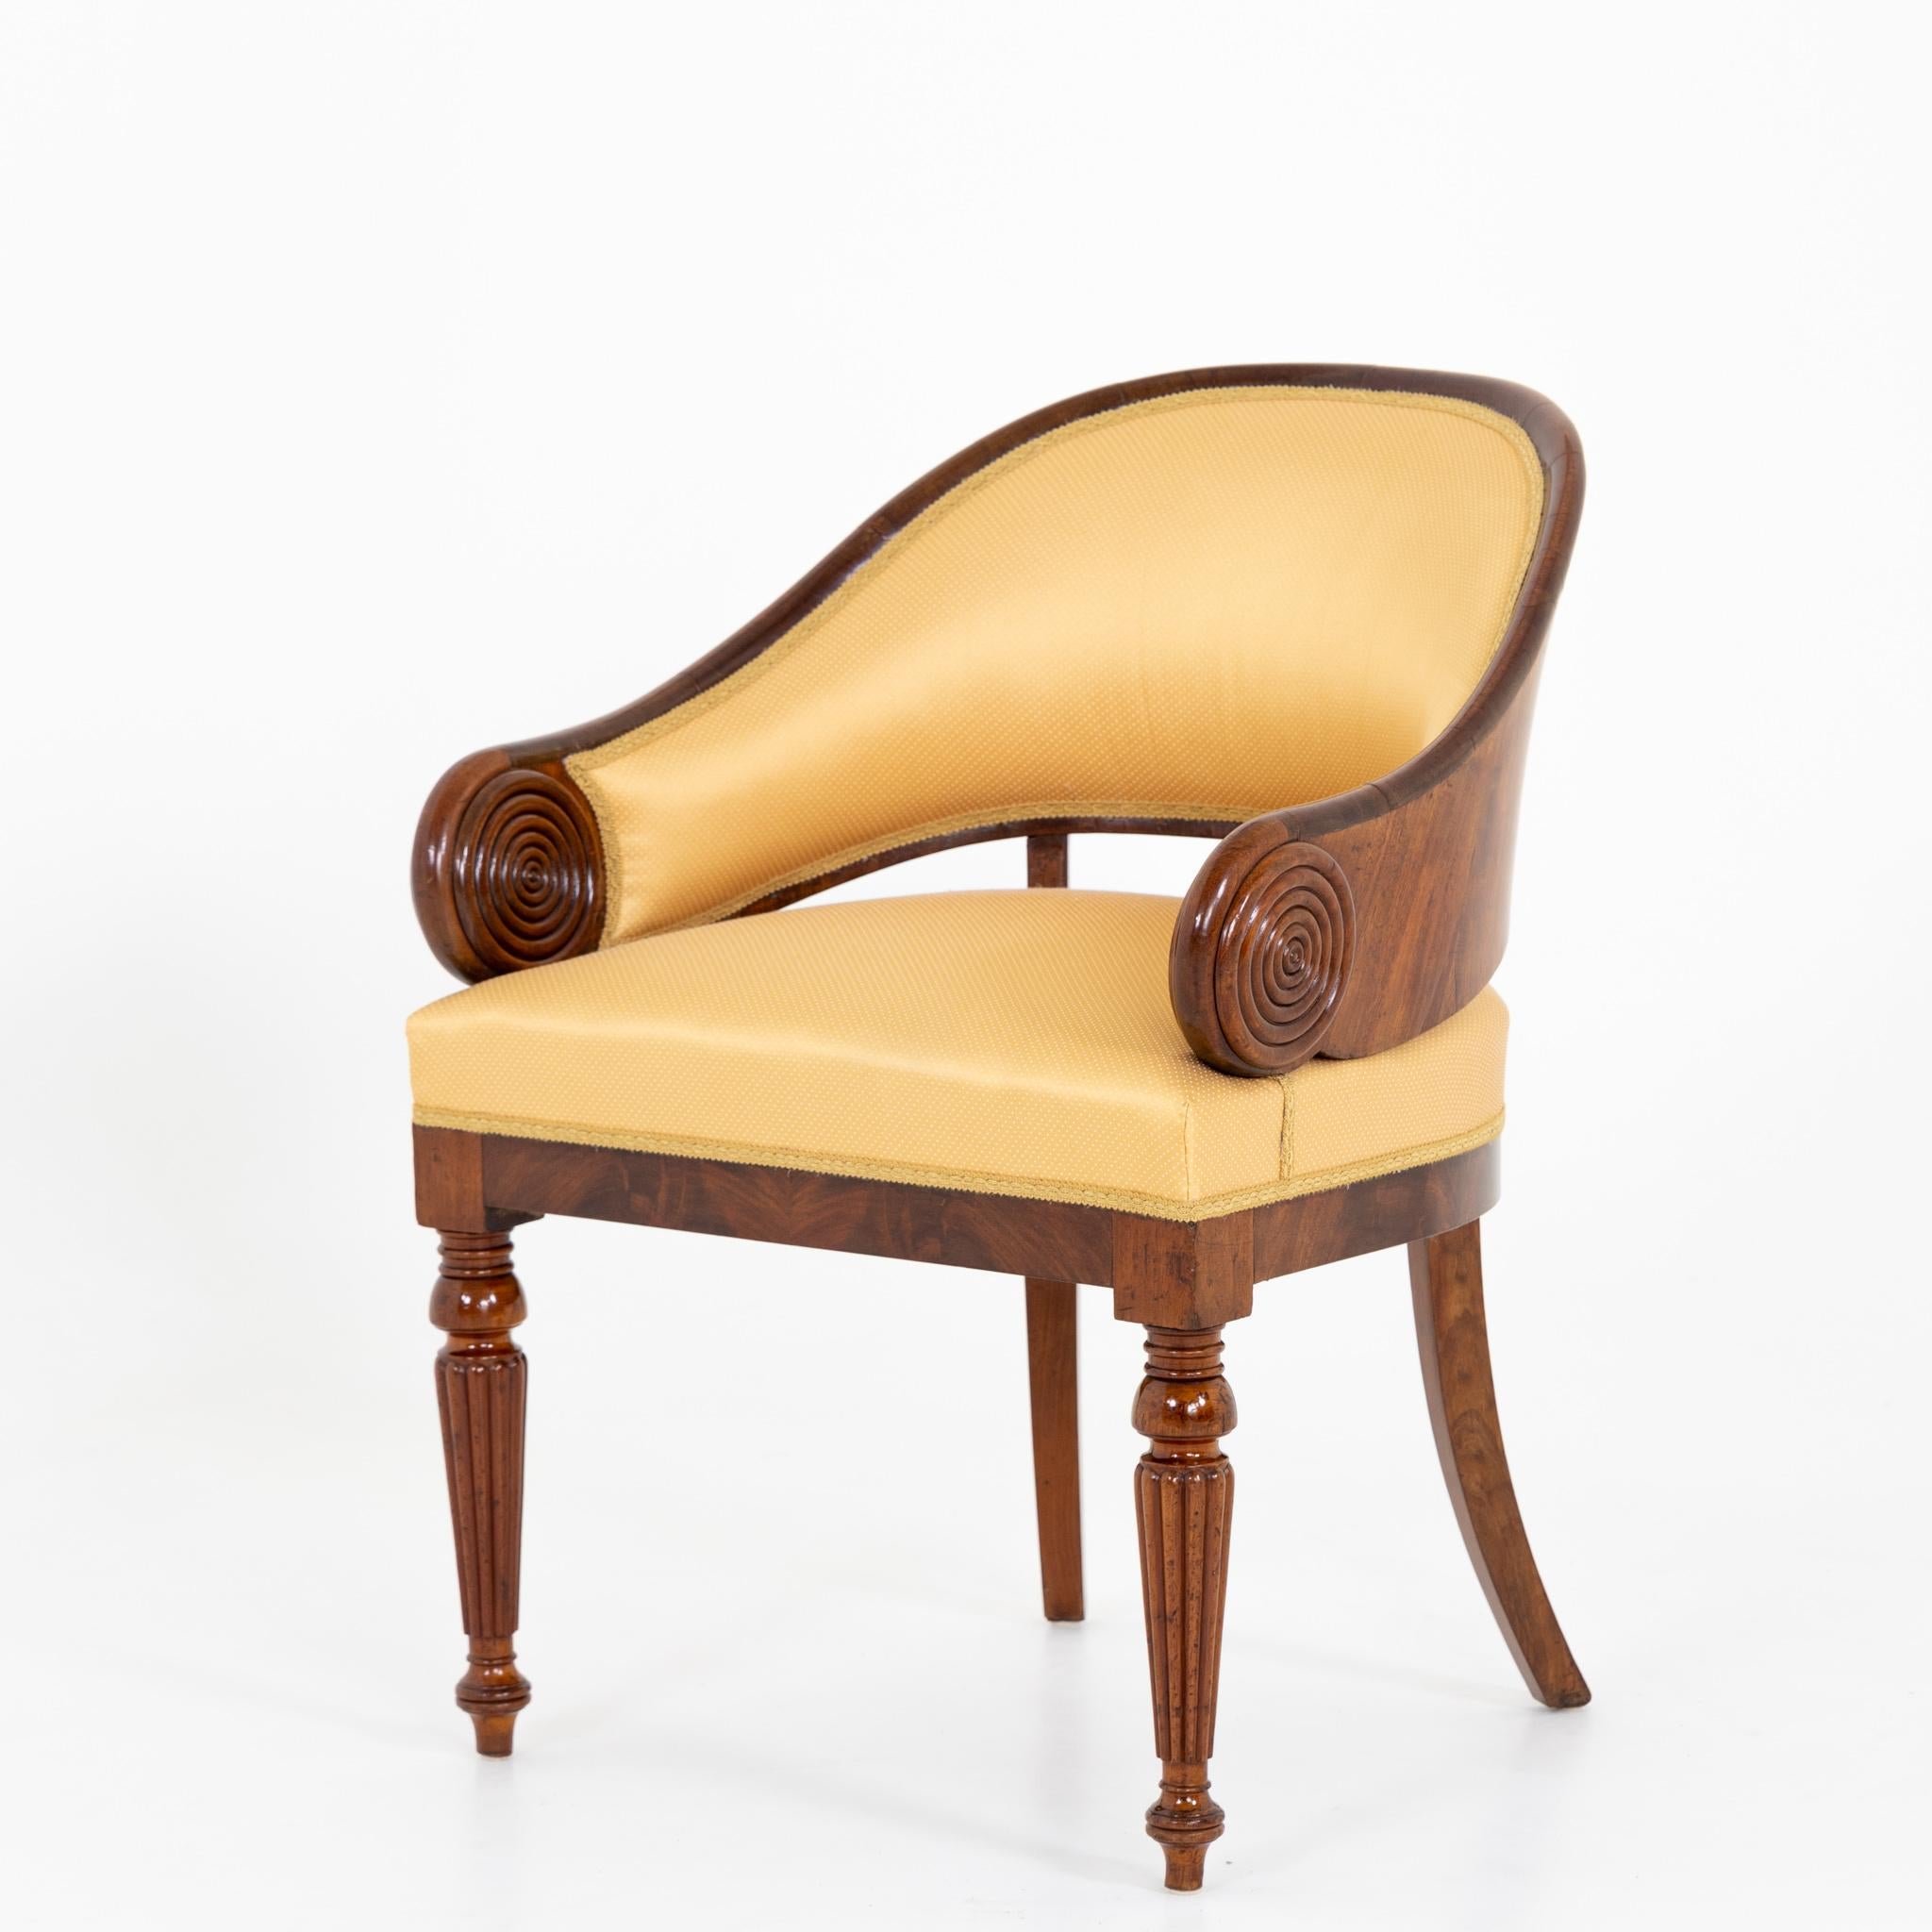 Mid-19th Century Armchair, Northern Europe / Northern Germany, circa 1830